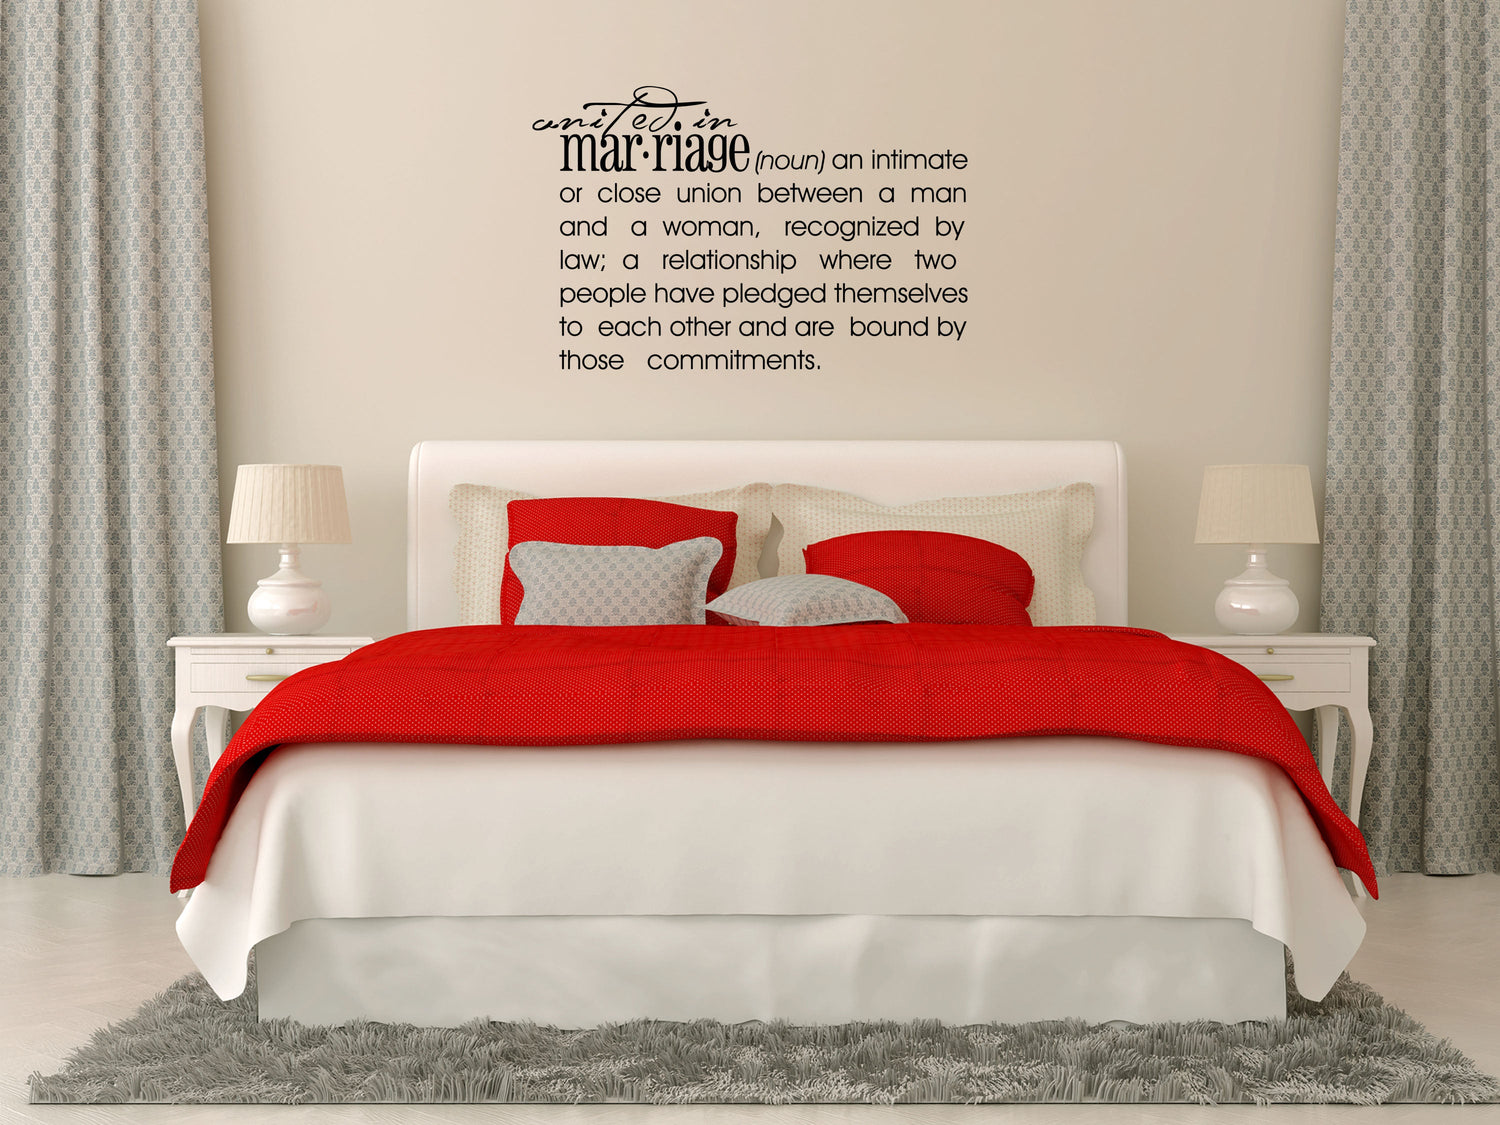 Marriage Definition - Inspirational Wall Decals Vinyl Wall Decal Inspirational Wall Signs 